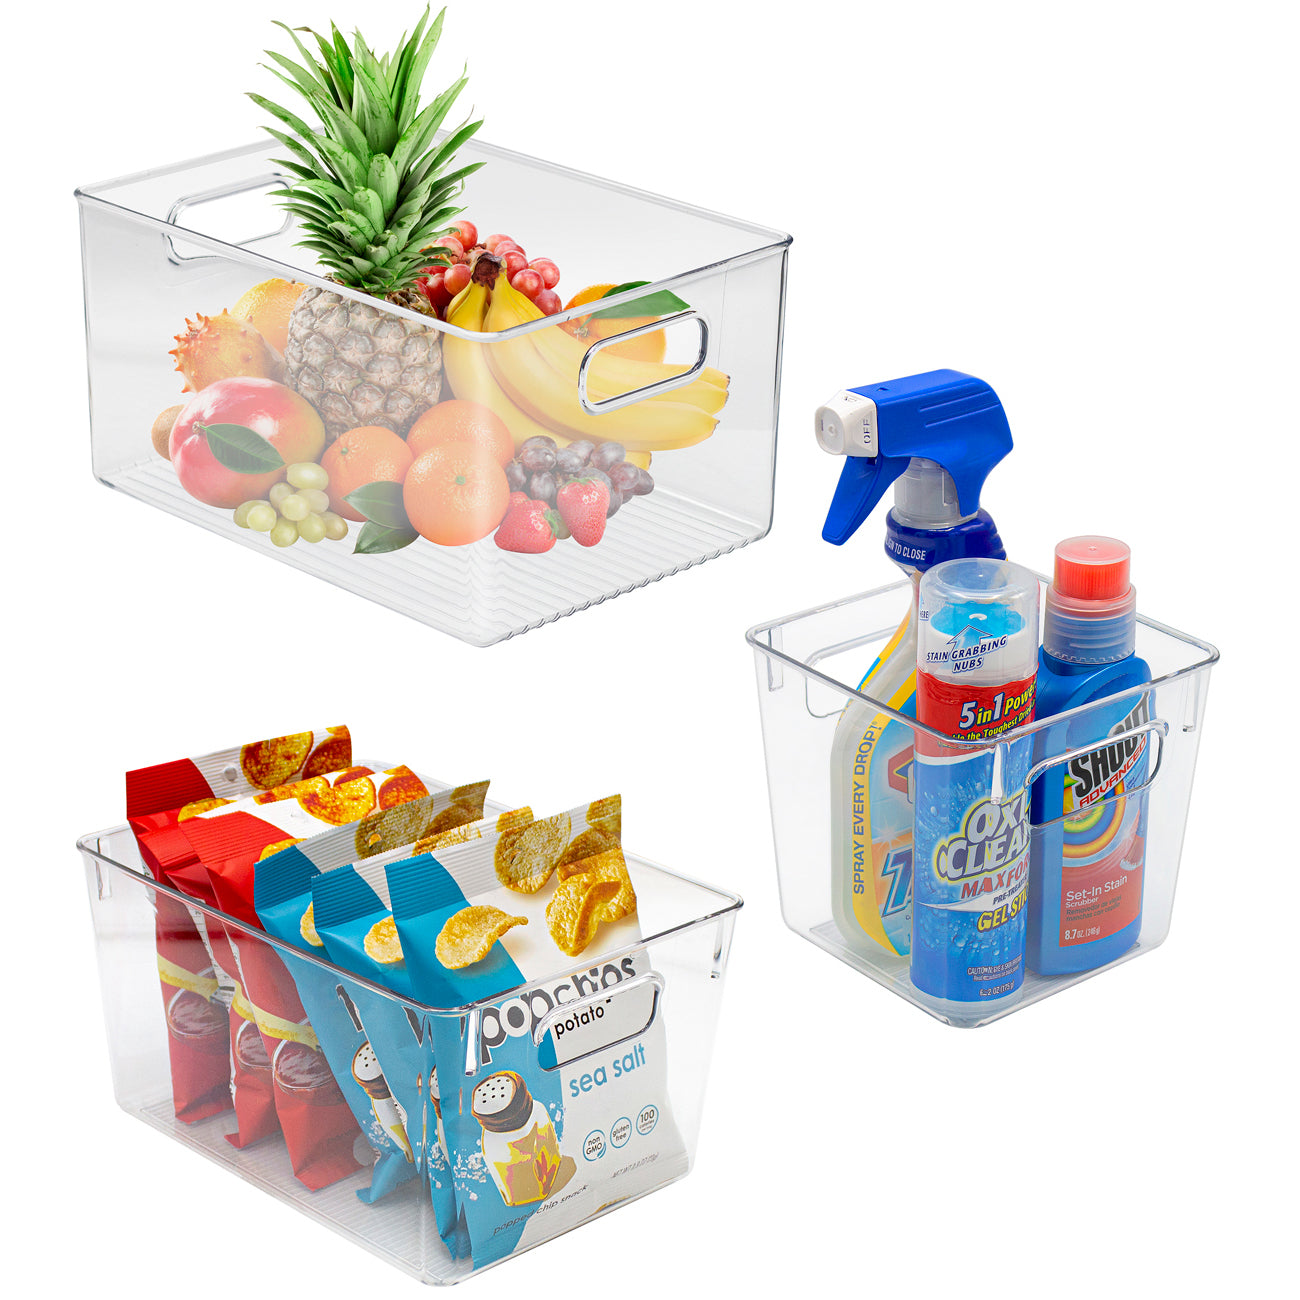 Easy Open Canister Set of 3 clear plastic storage containers with